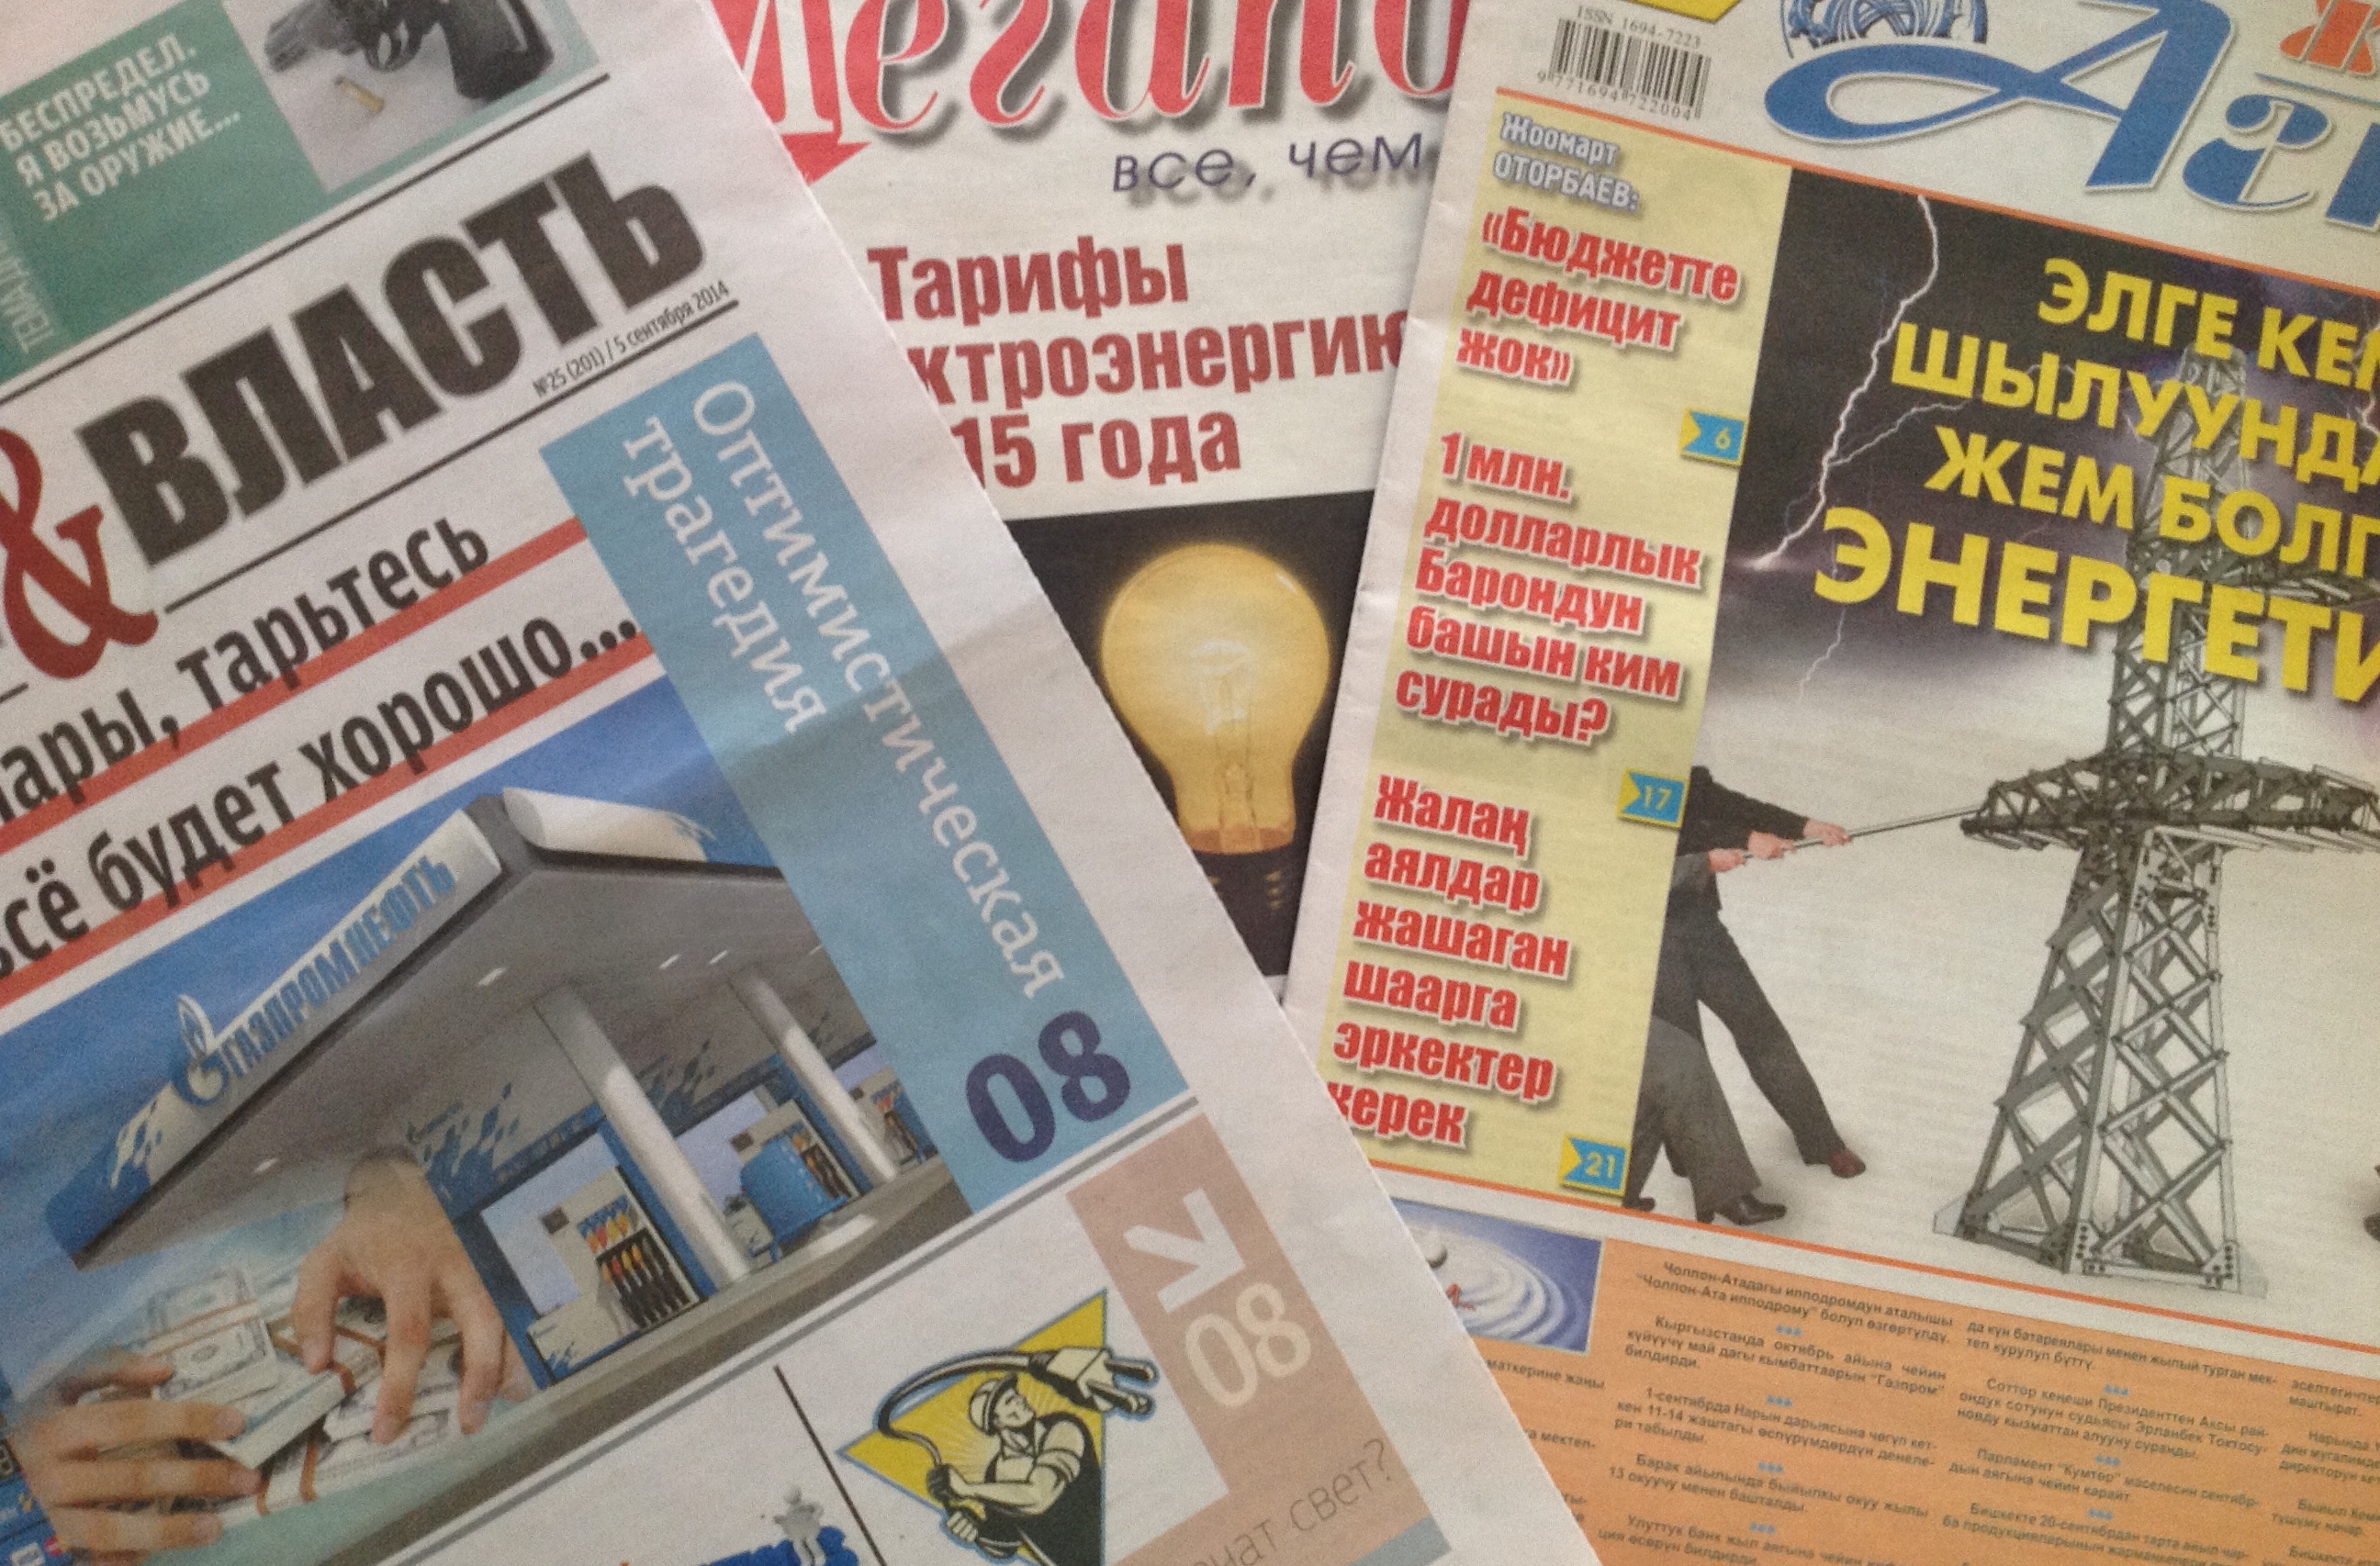 Kyrgyzstan's energy deficit has been on the front pages of local newspapers since July. Photo by Chris Rickleton.